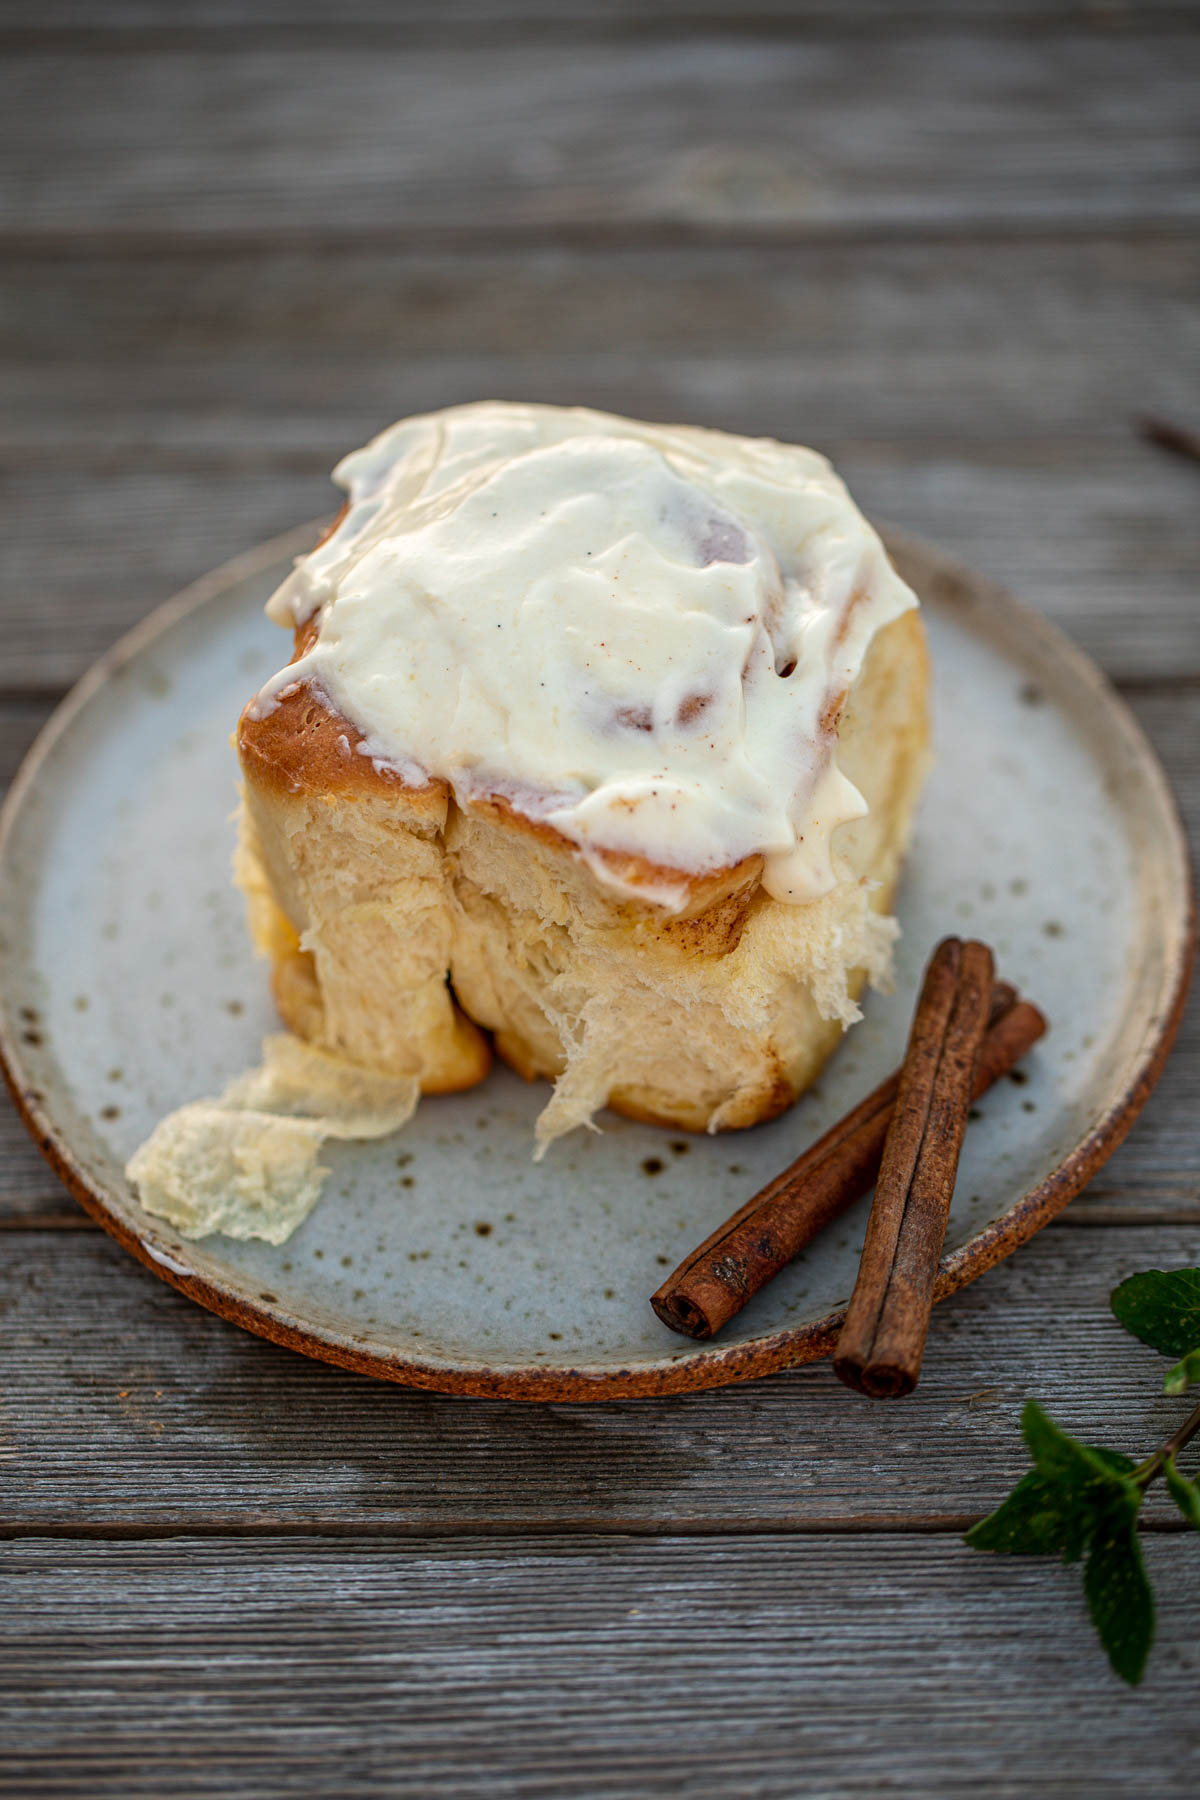 Cinnamon roll with cream cheese frosting